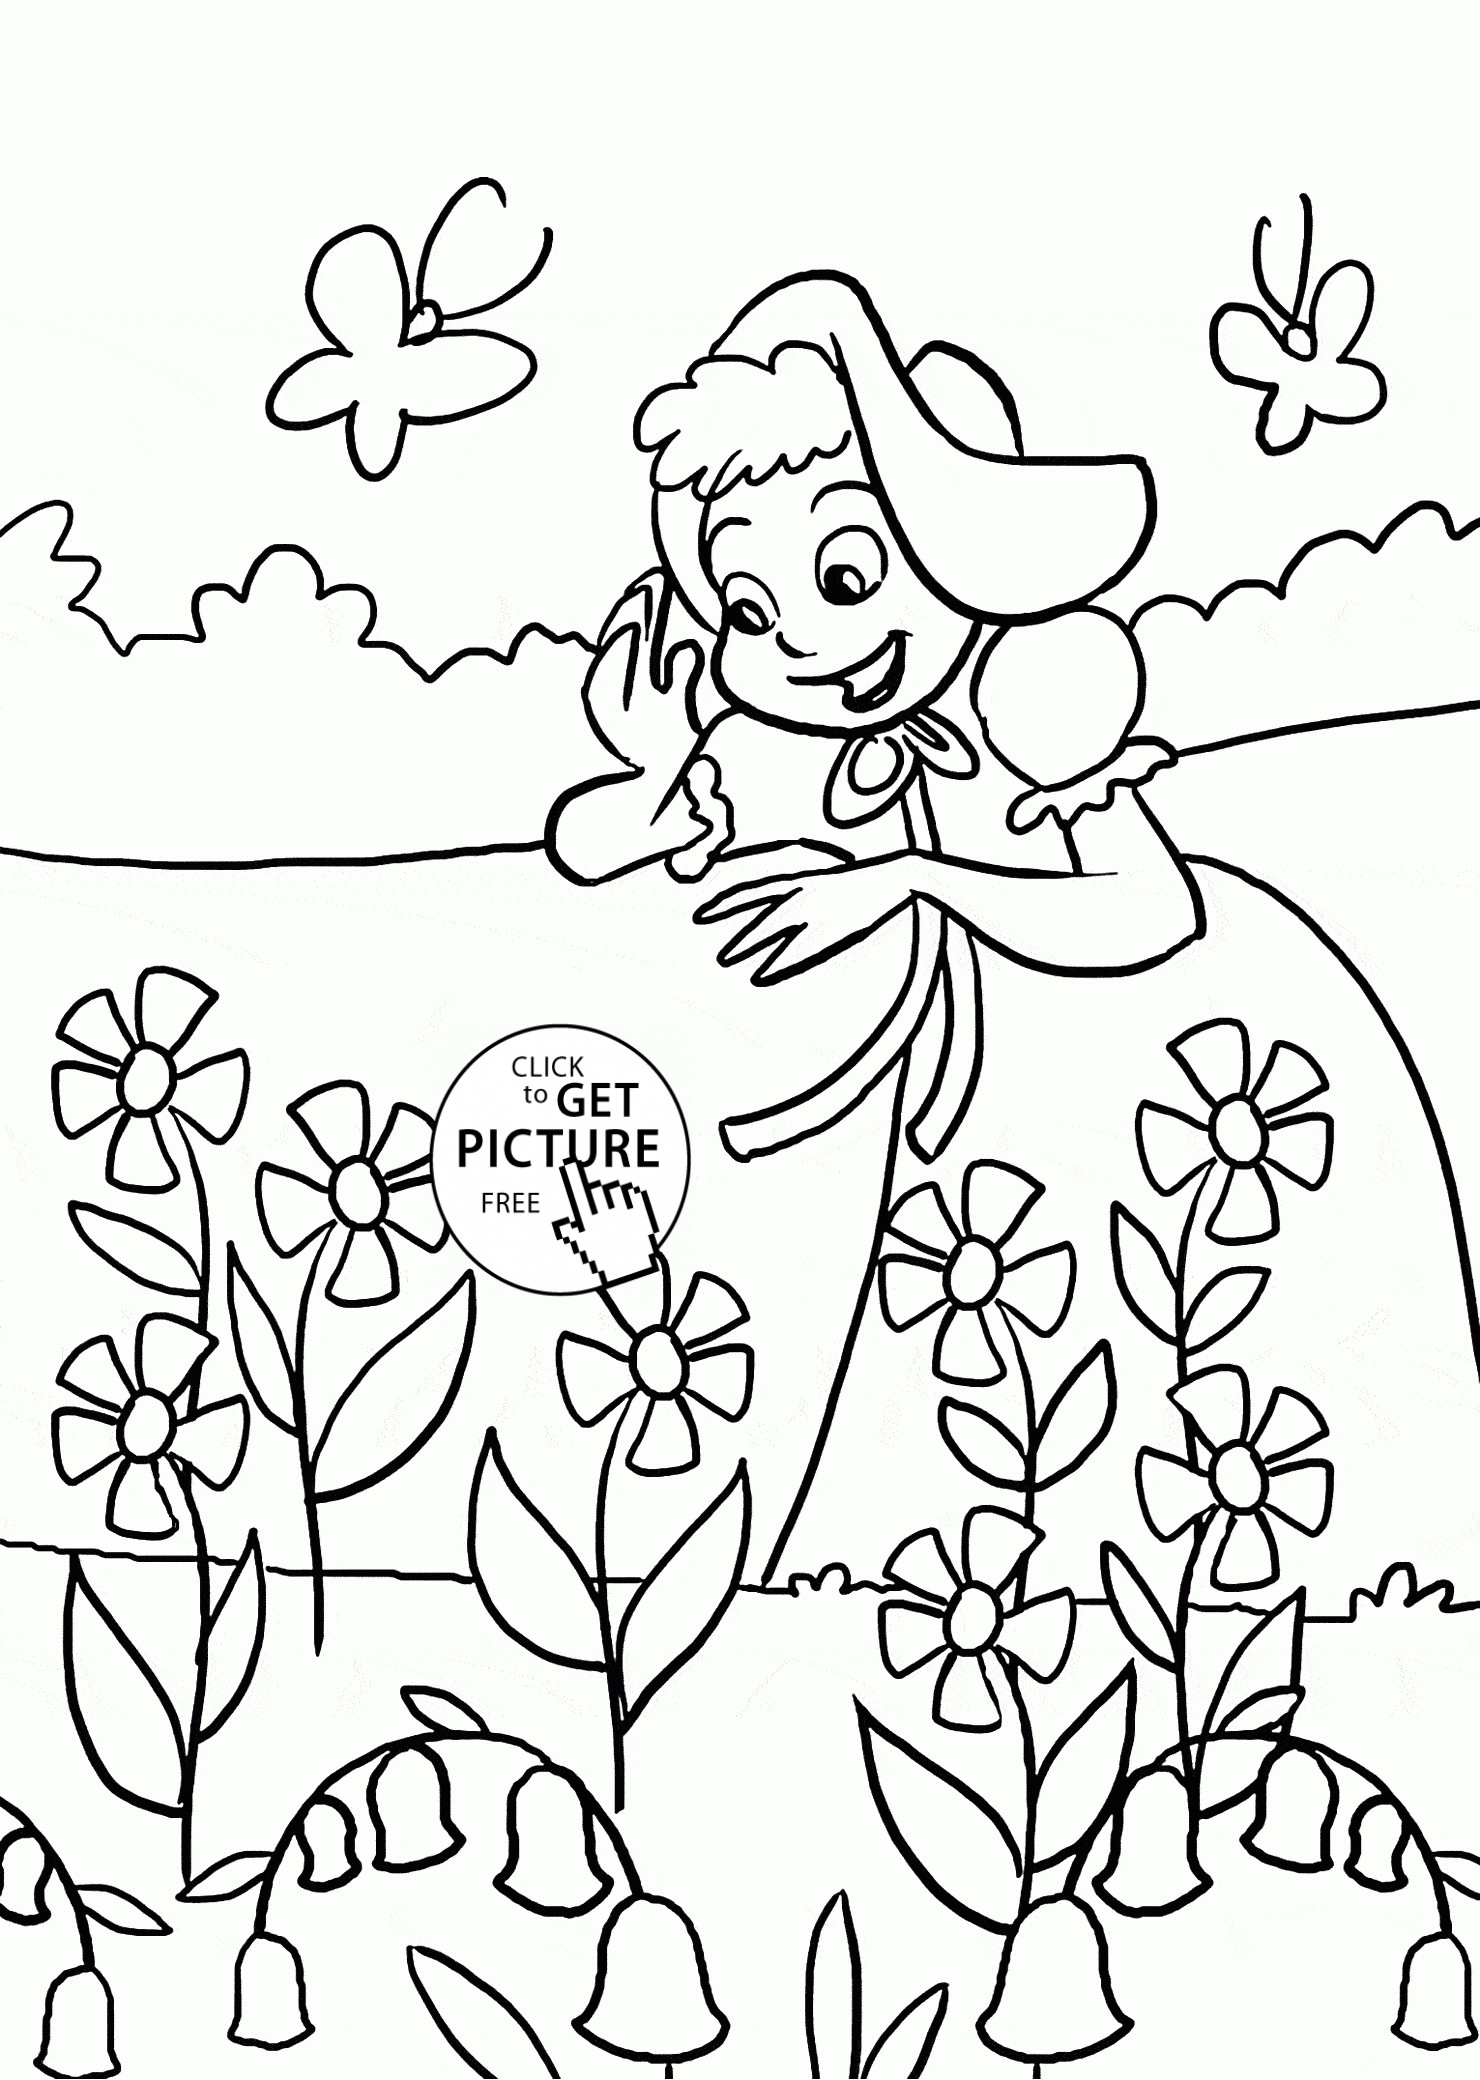 Spring Fling Coloring Sheets For Kids
 Happy Girl and Spring Flowers coloring page for kids